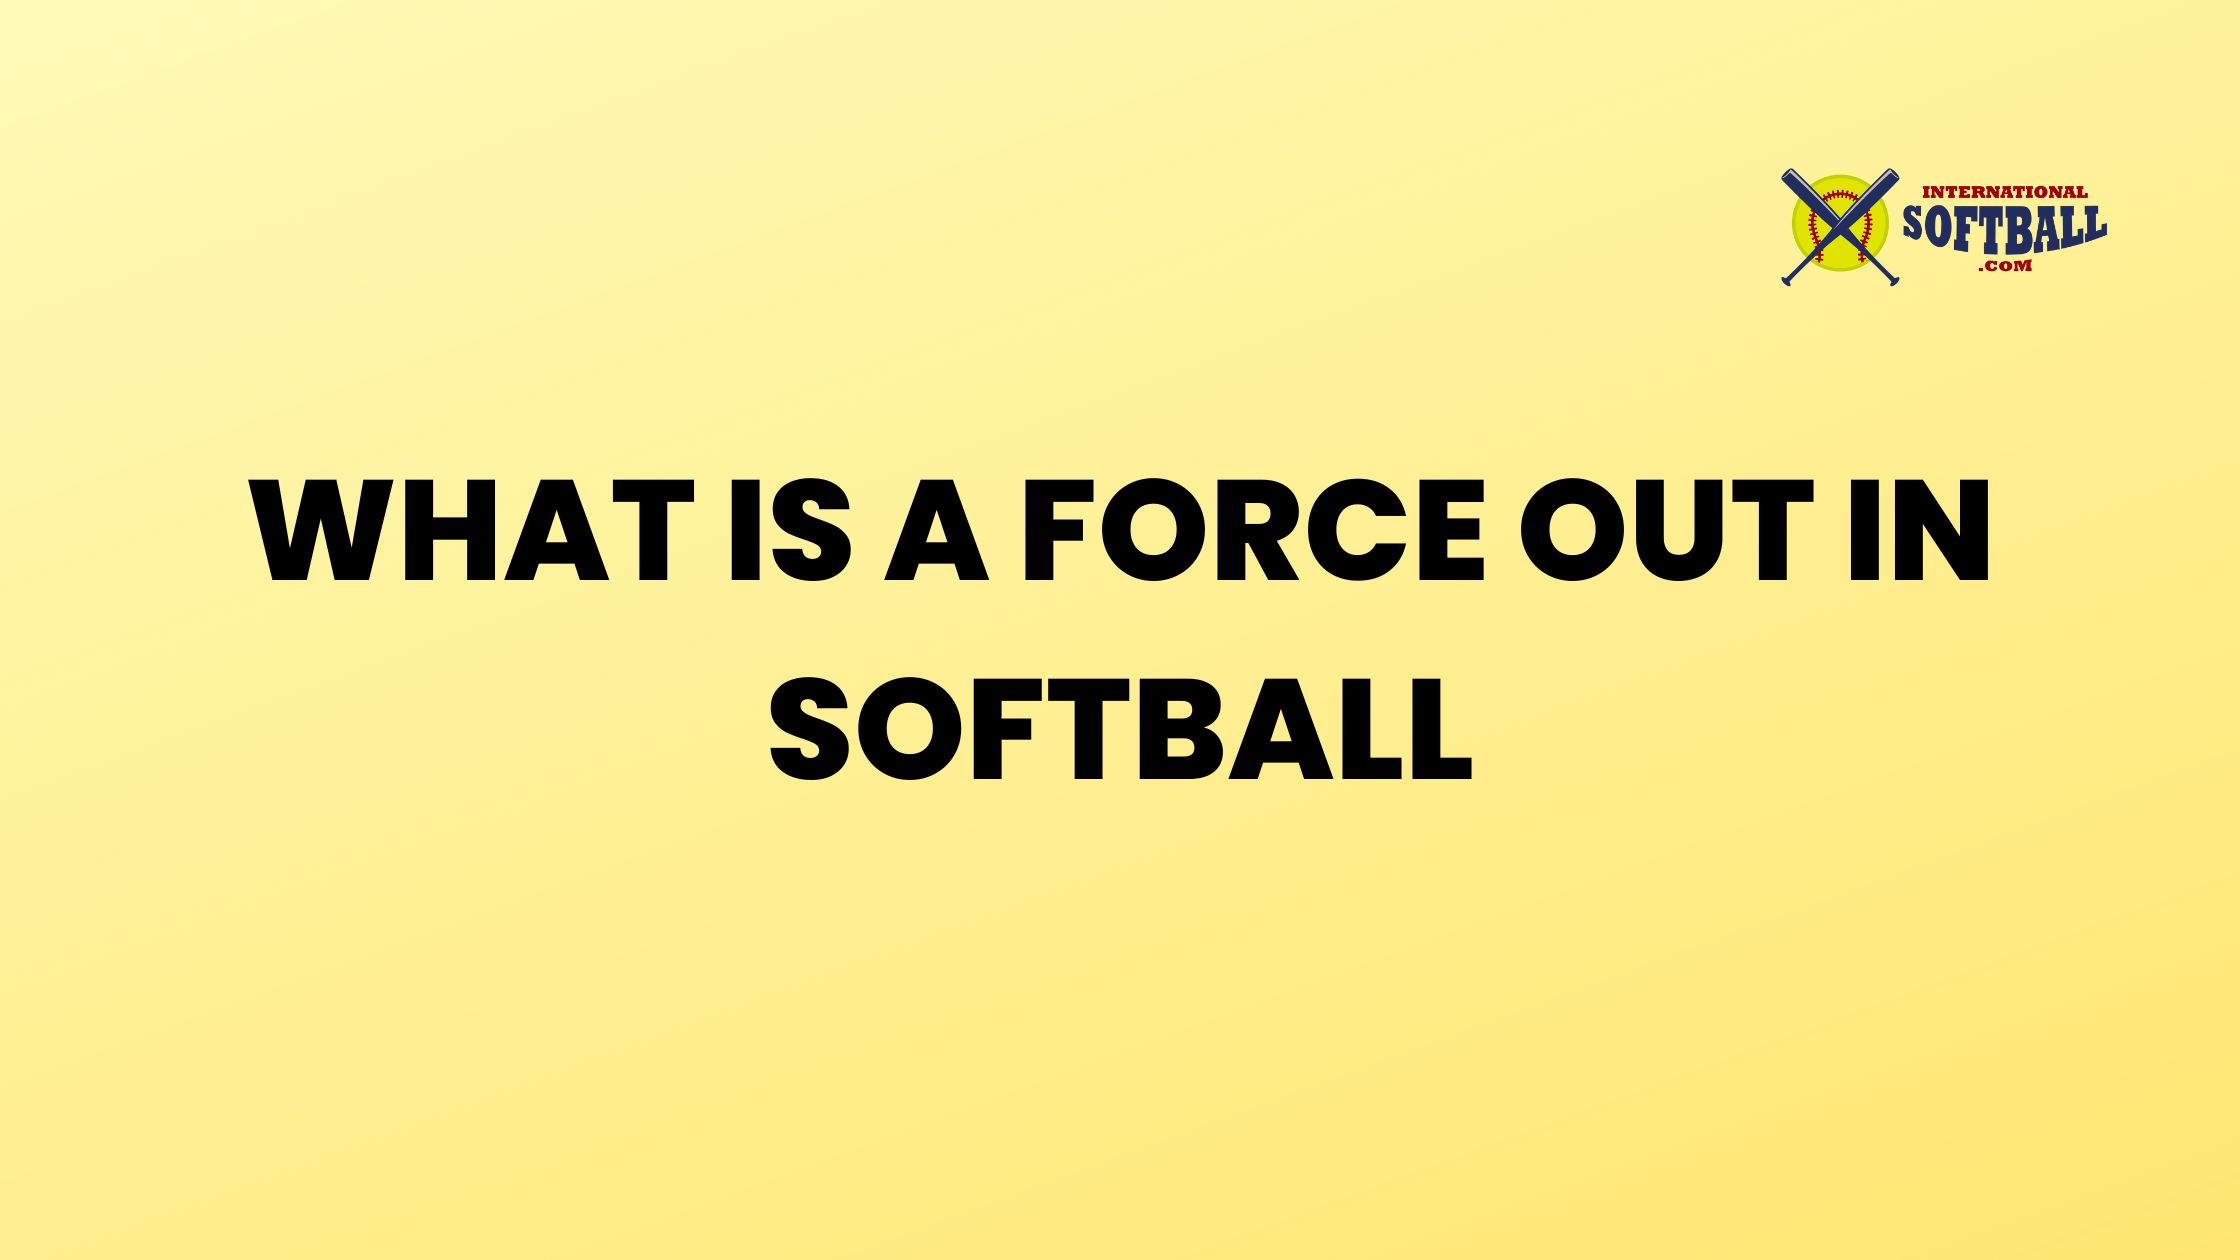 WHAT IS A FORCE OUT IN SOFTBALL